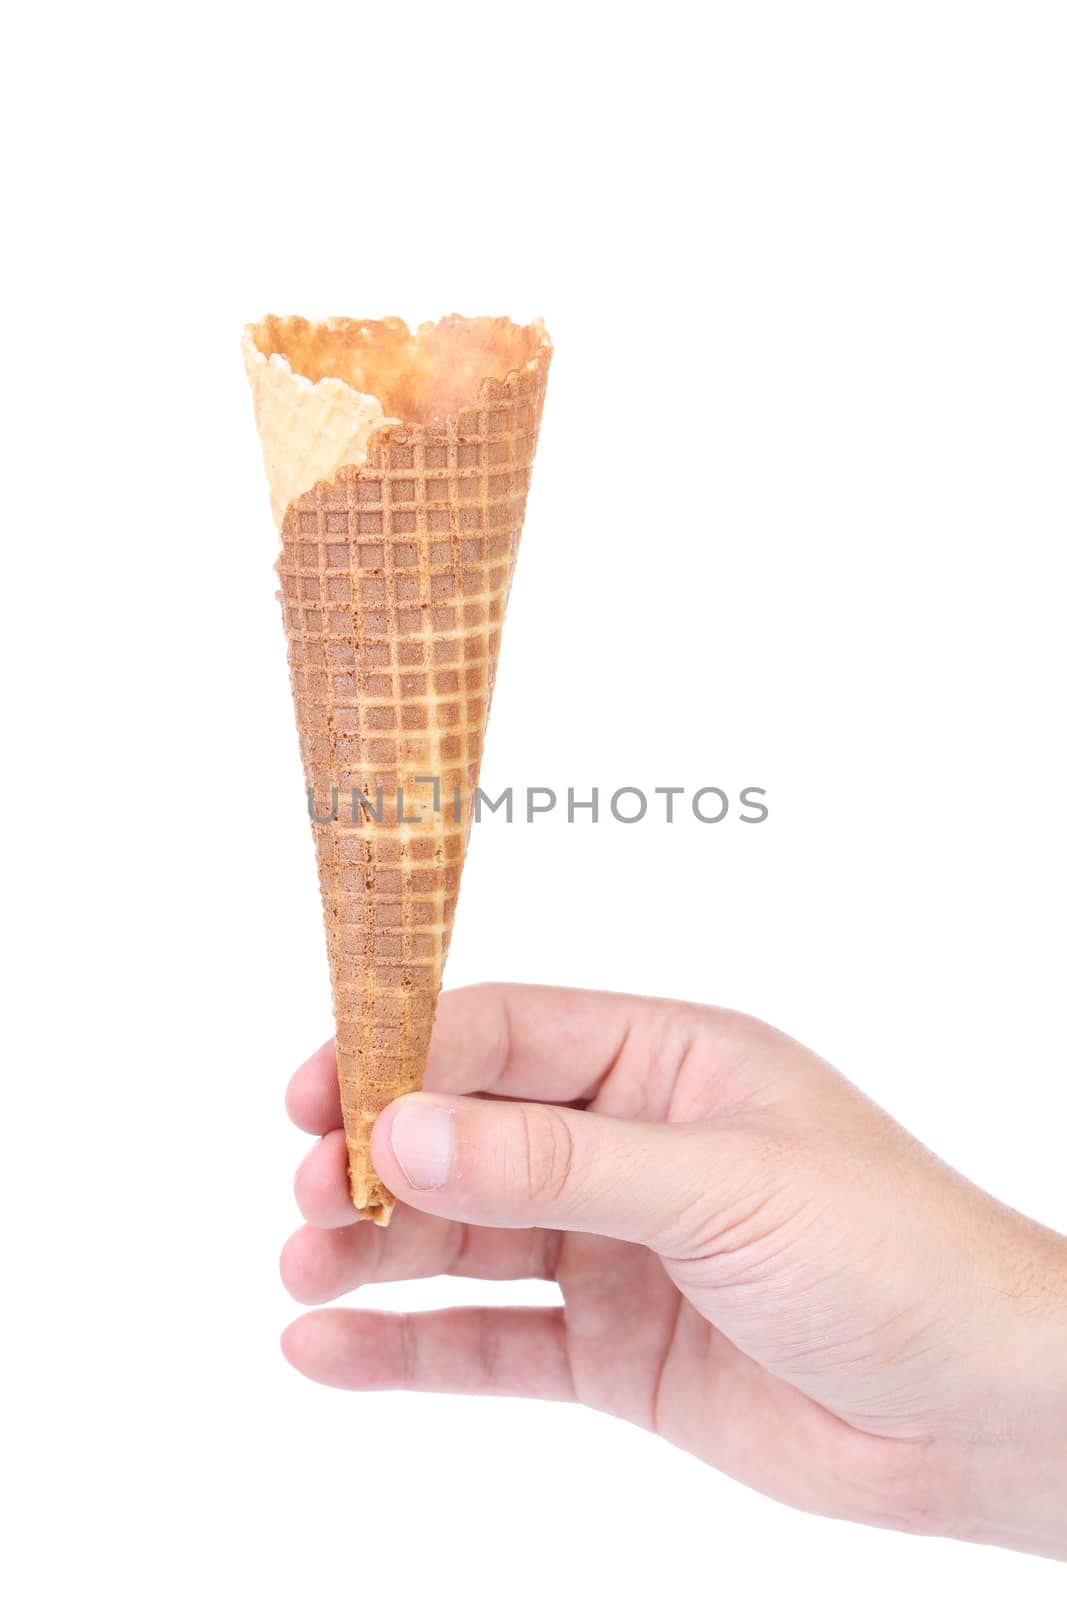 Wafer cup for ice-cream in hand. Isolated on a white background.